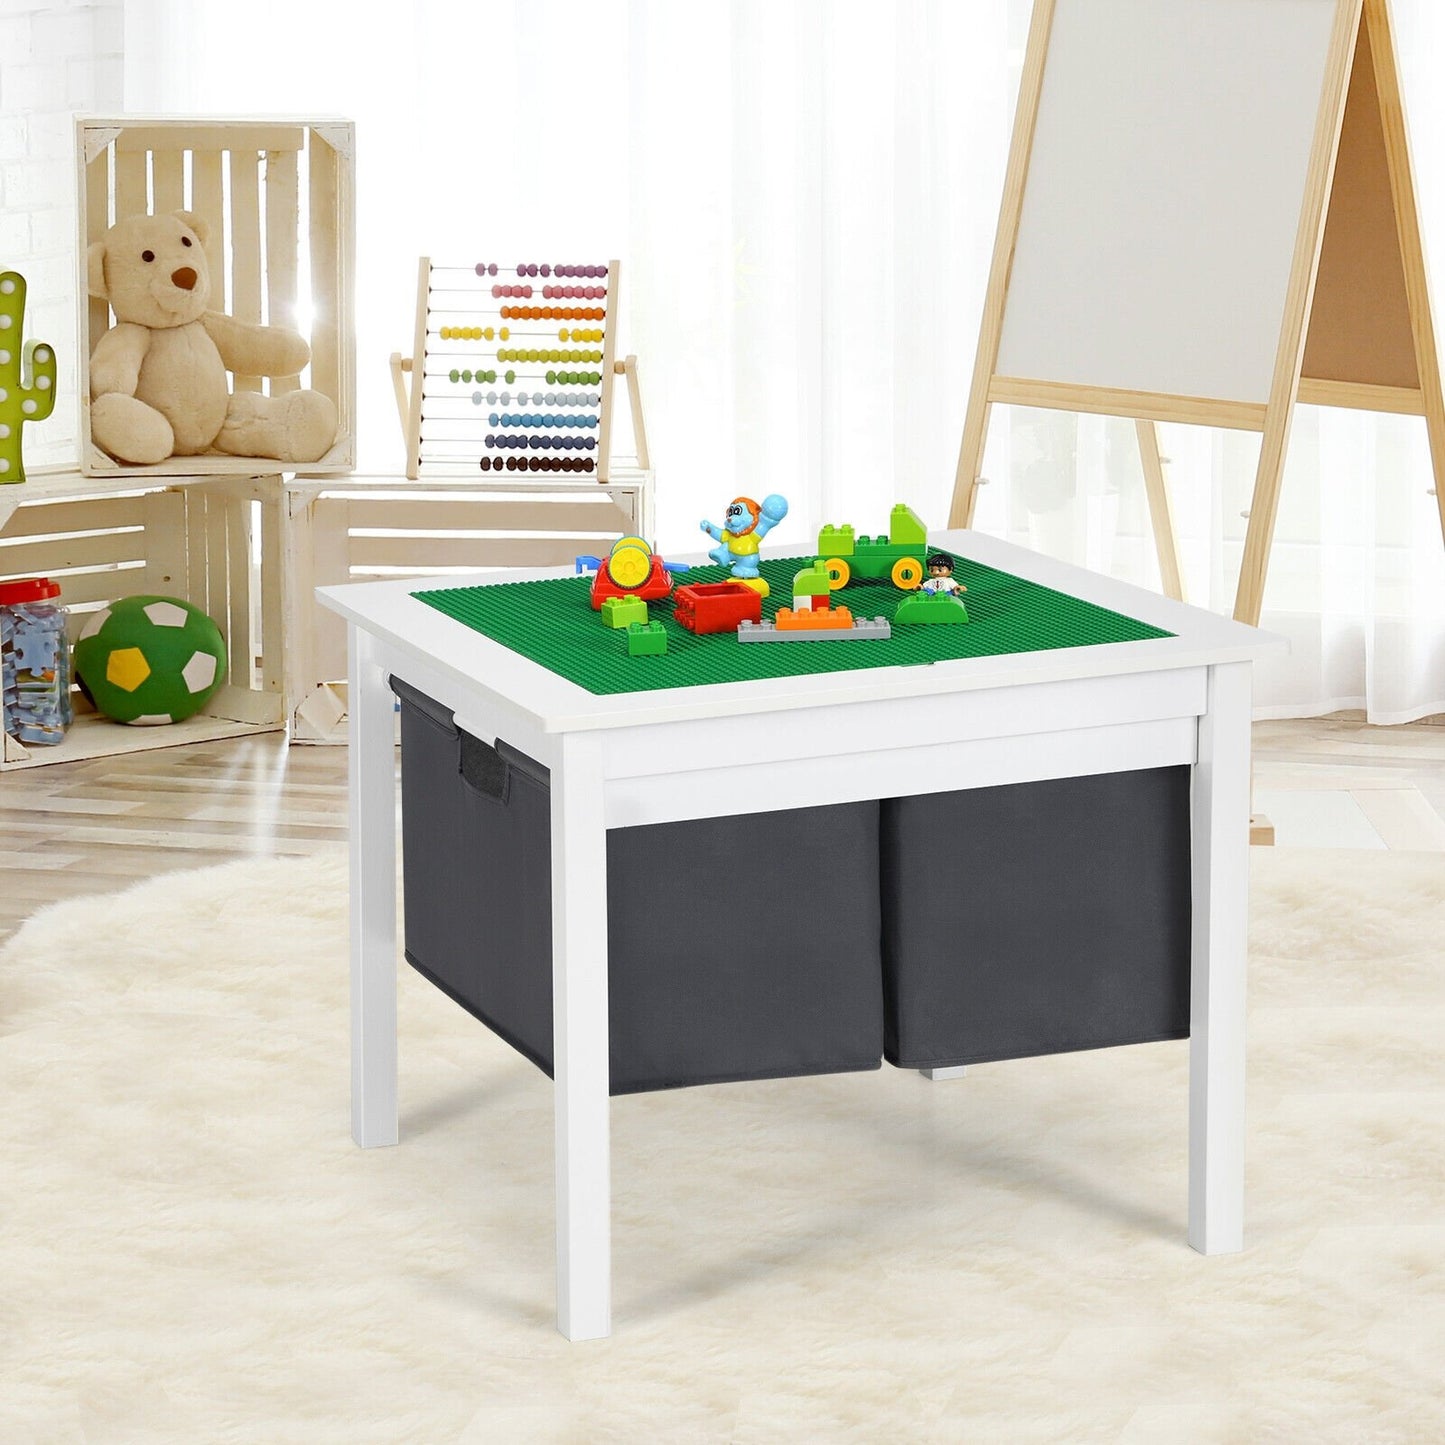 2-in-1 Kids Double-sided Activity Building Block Table with Drawers - Gallery Canada